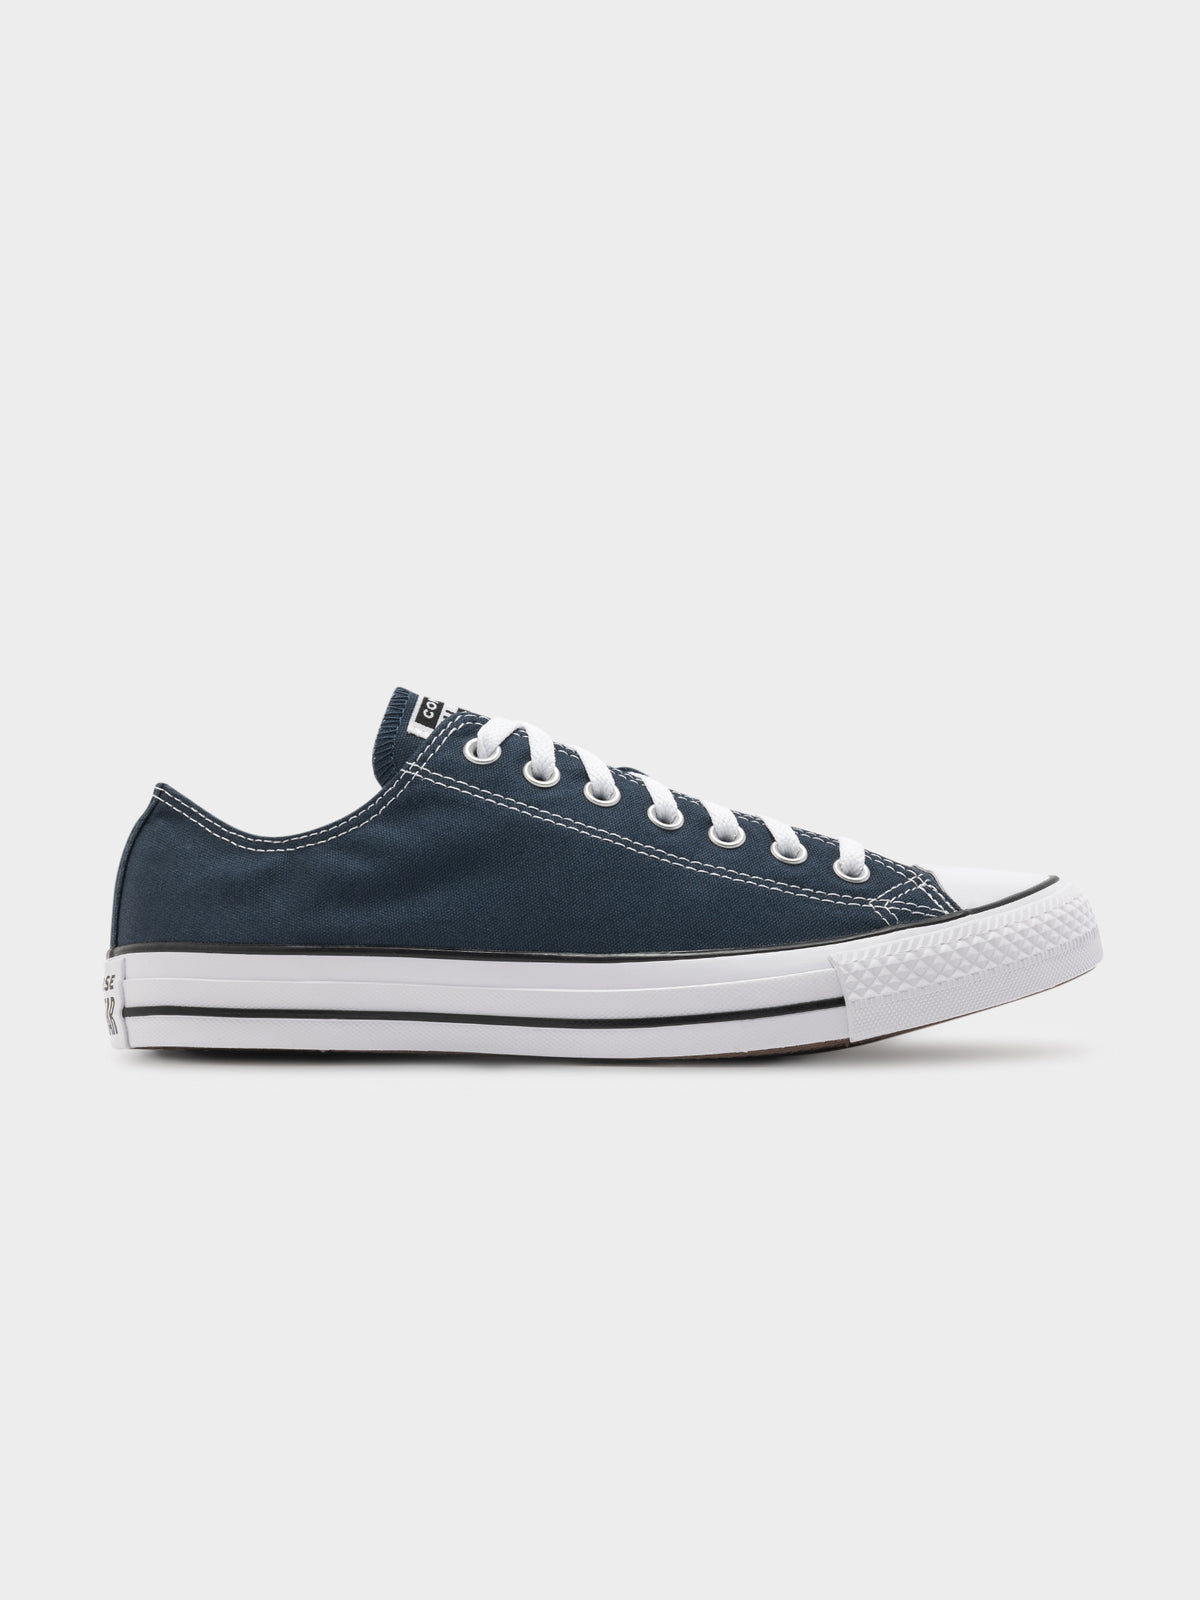 Unisex Converse Chuck Taylor All Star Classic Low Top in Navy